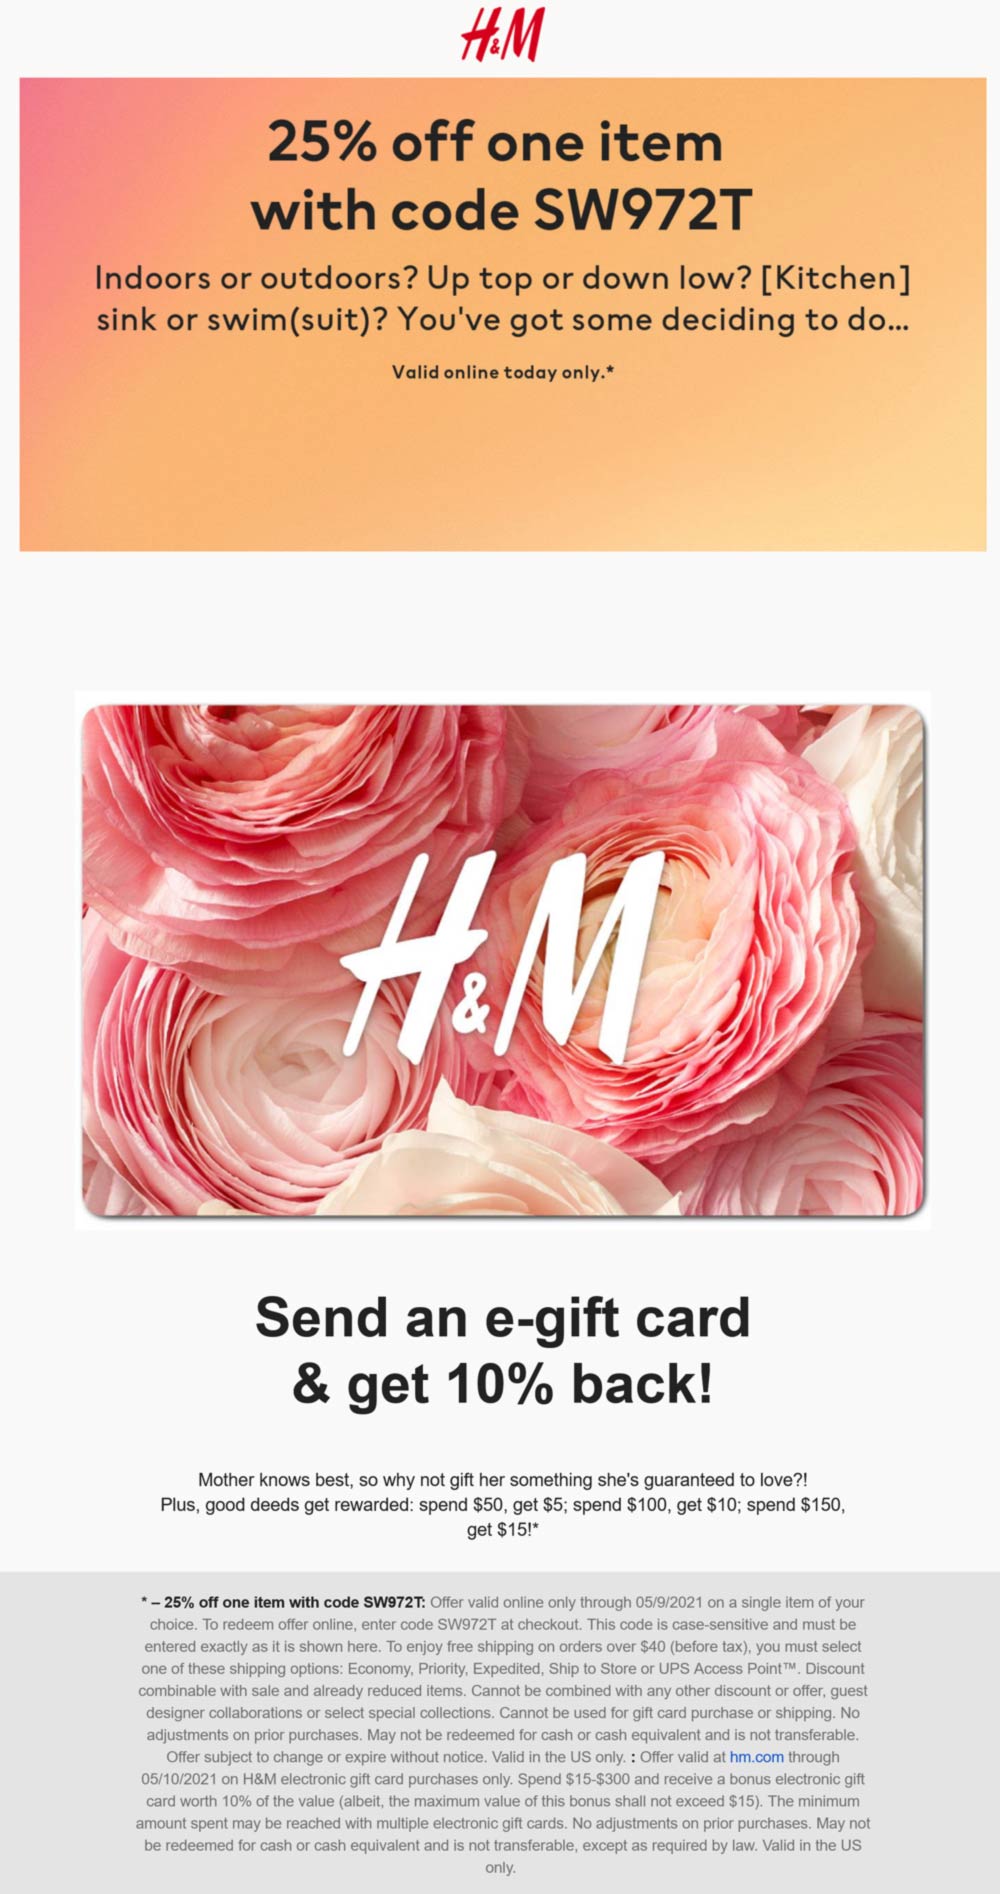 H&M stores Coupon  25% off a single item online today at H&M via promo code SW972T #hm 